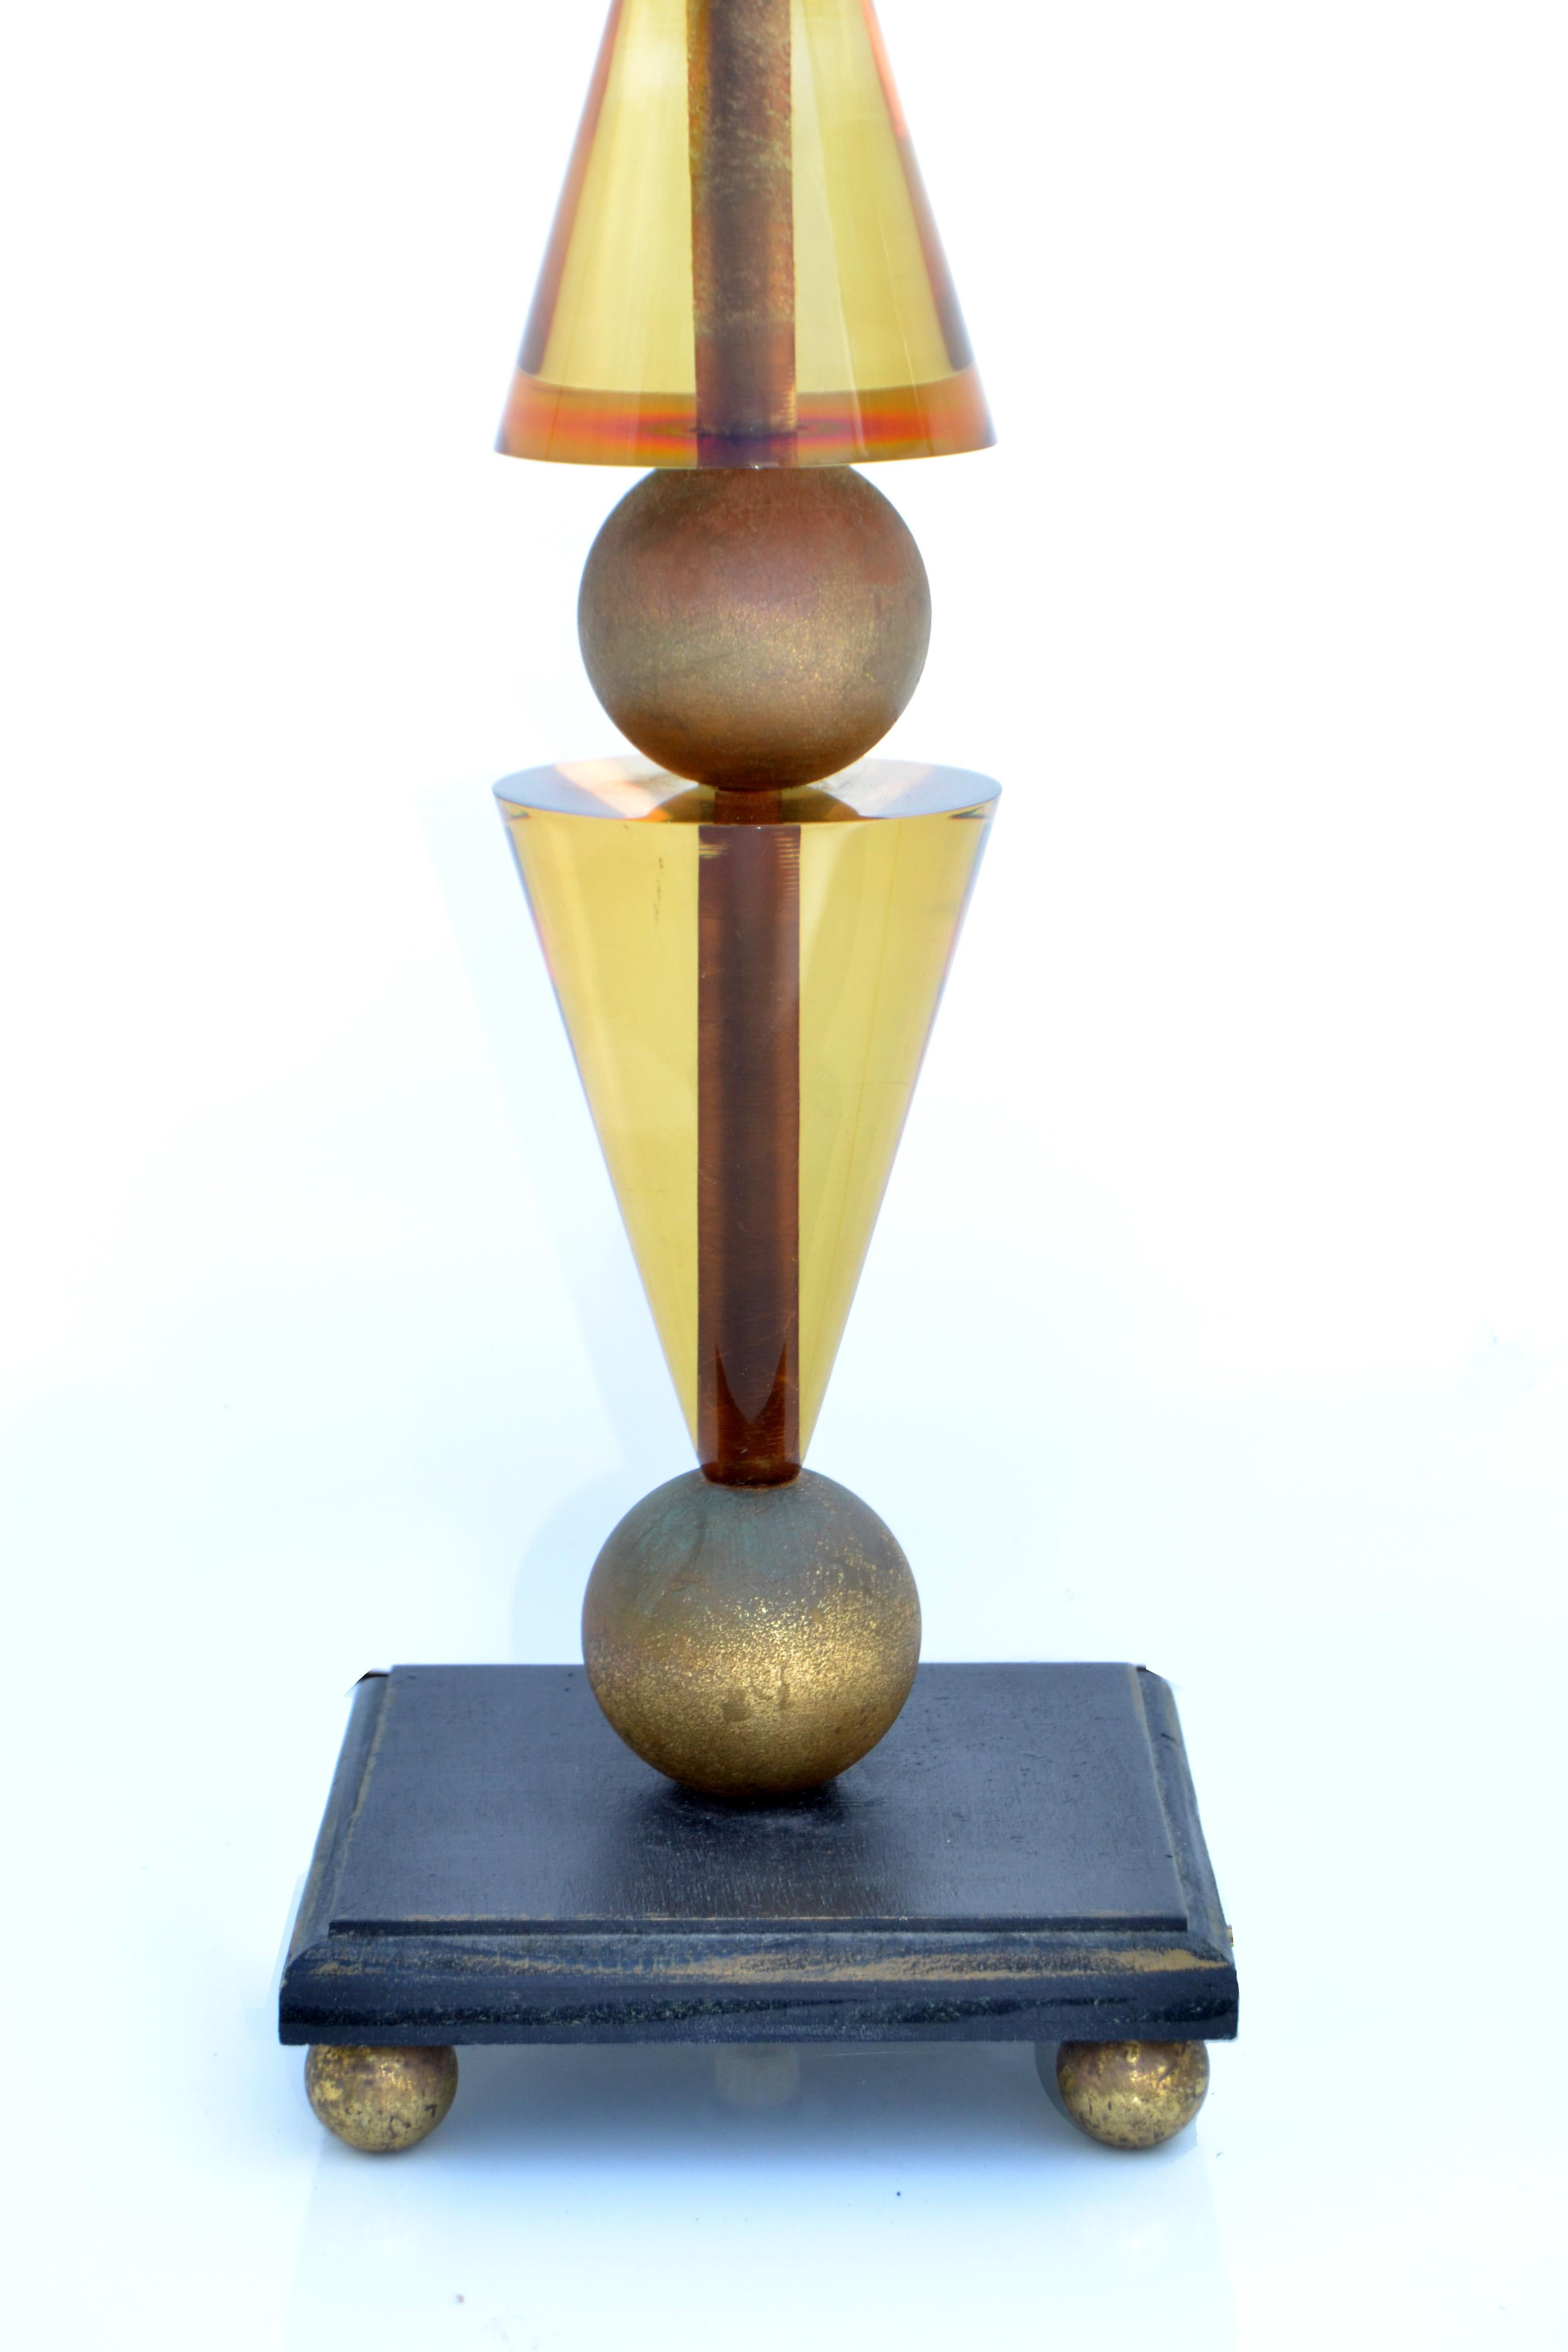 20th Century Hivo Van Teal Table Lamp Amber Gold Lucite & Wood Original Shade Midcentury 1979 For Sale